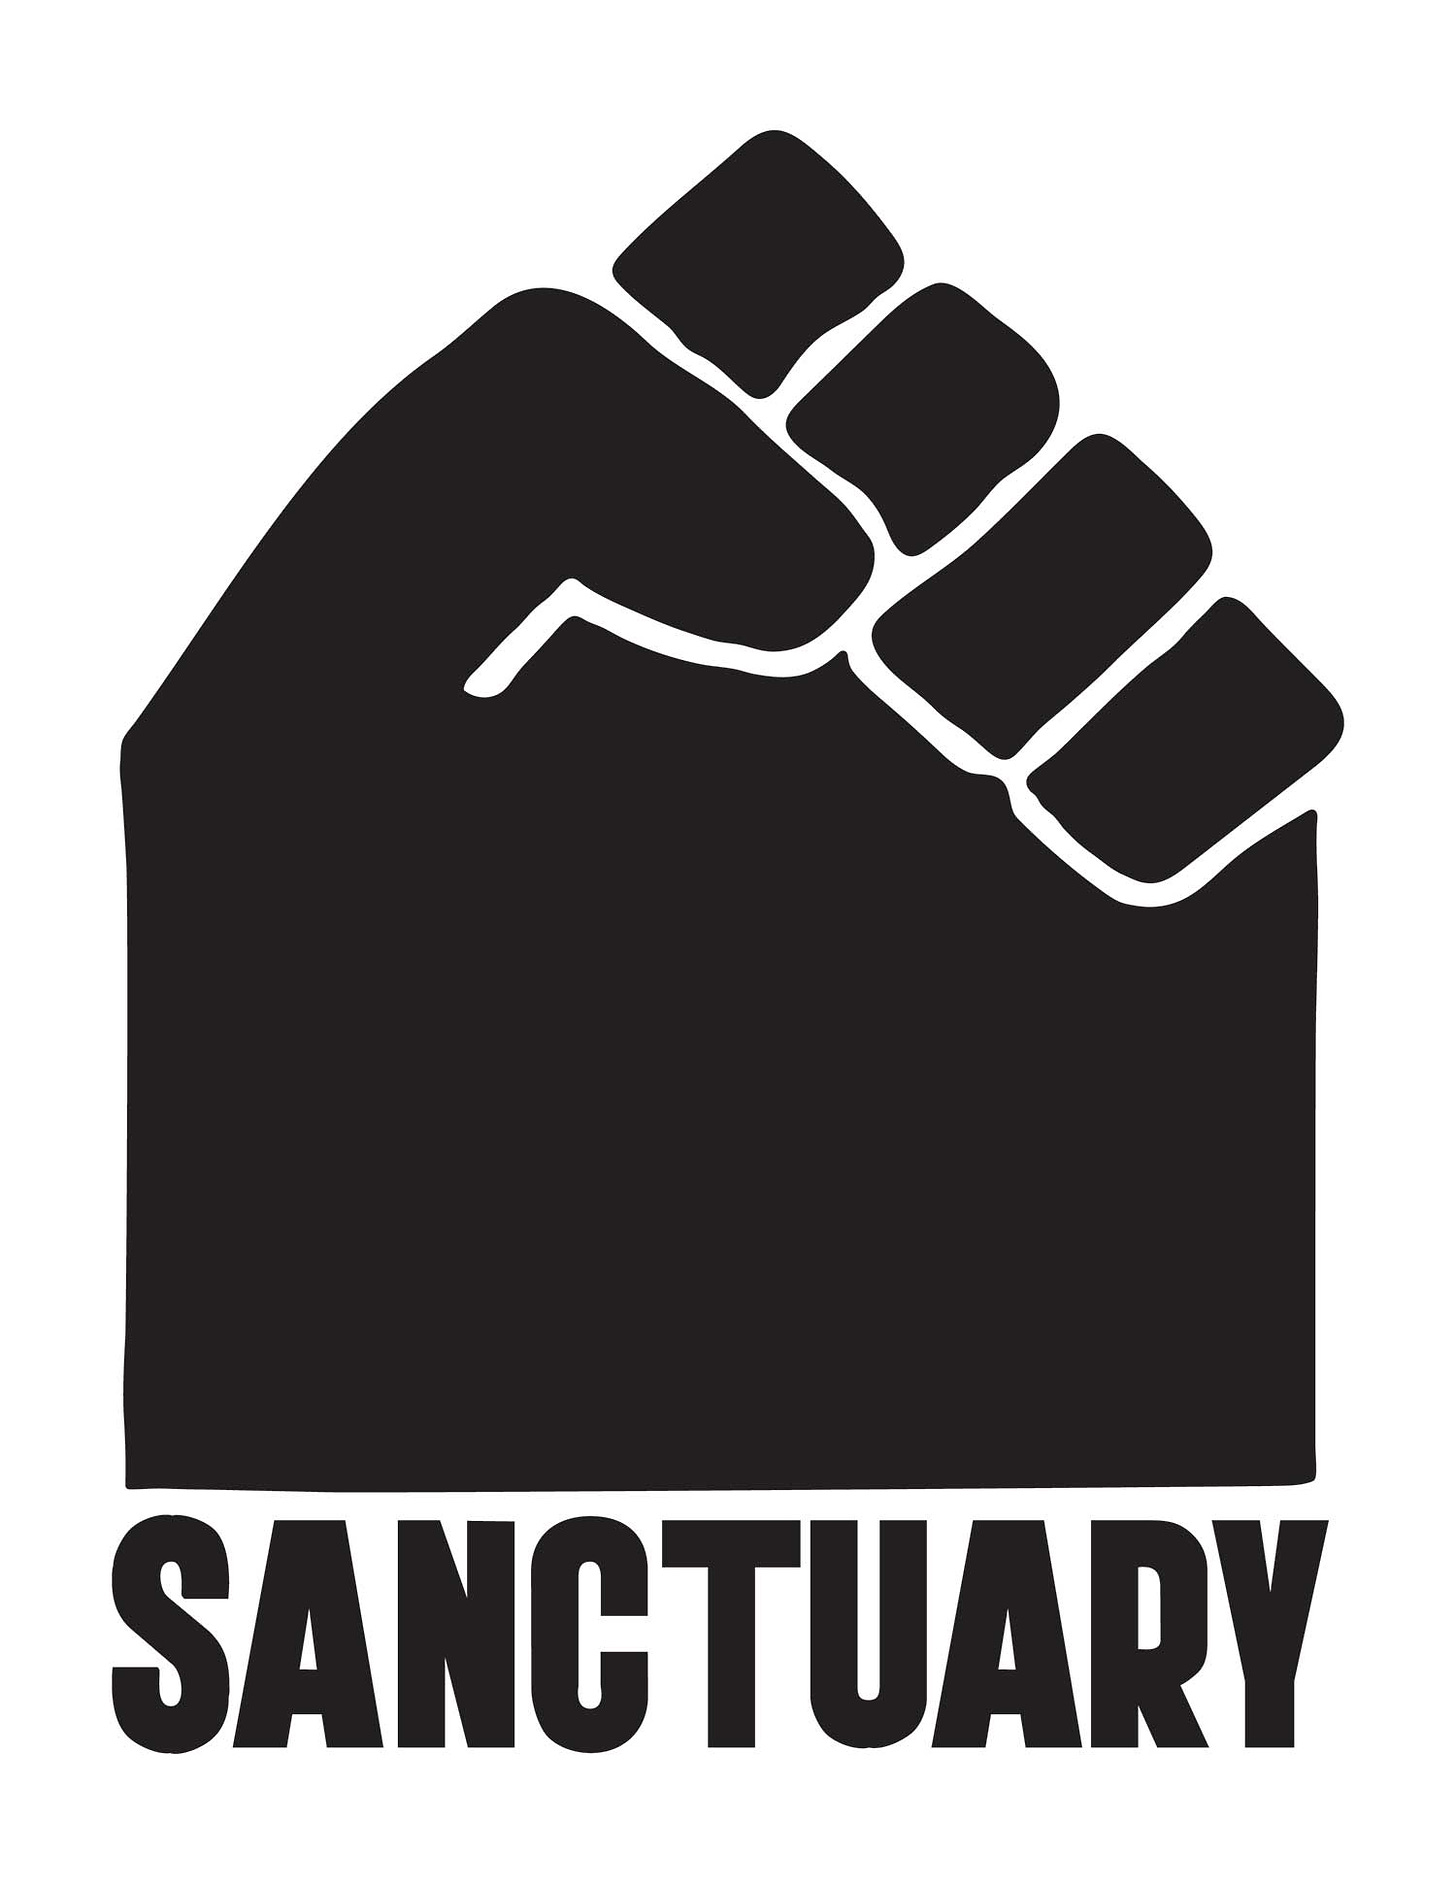 Square-ish, stylized black fist in the shape of a house. The word, “SANCTUARY” is placed at the bottom.